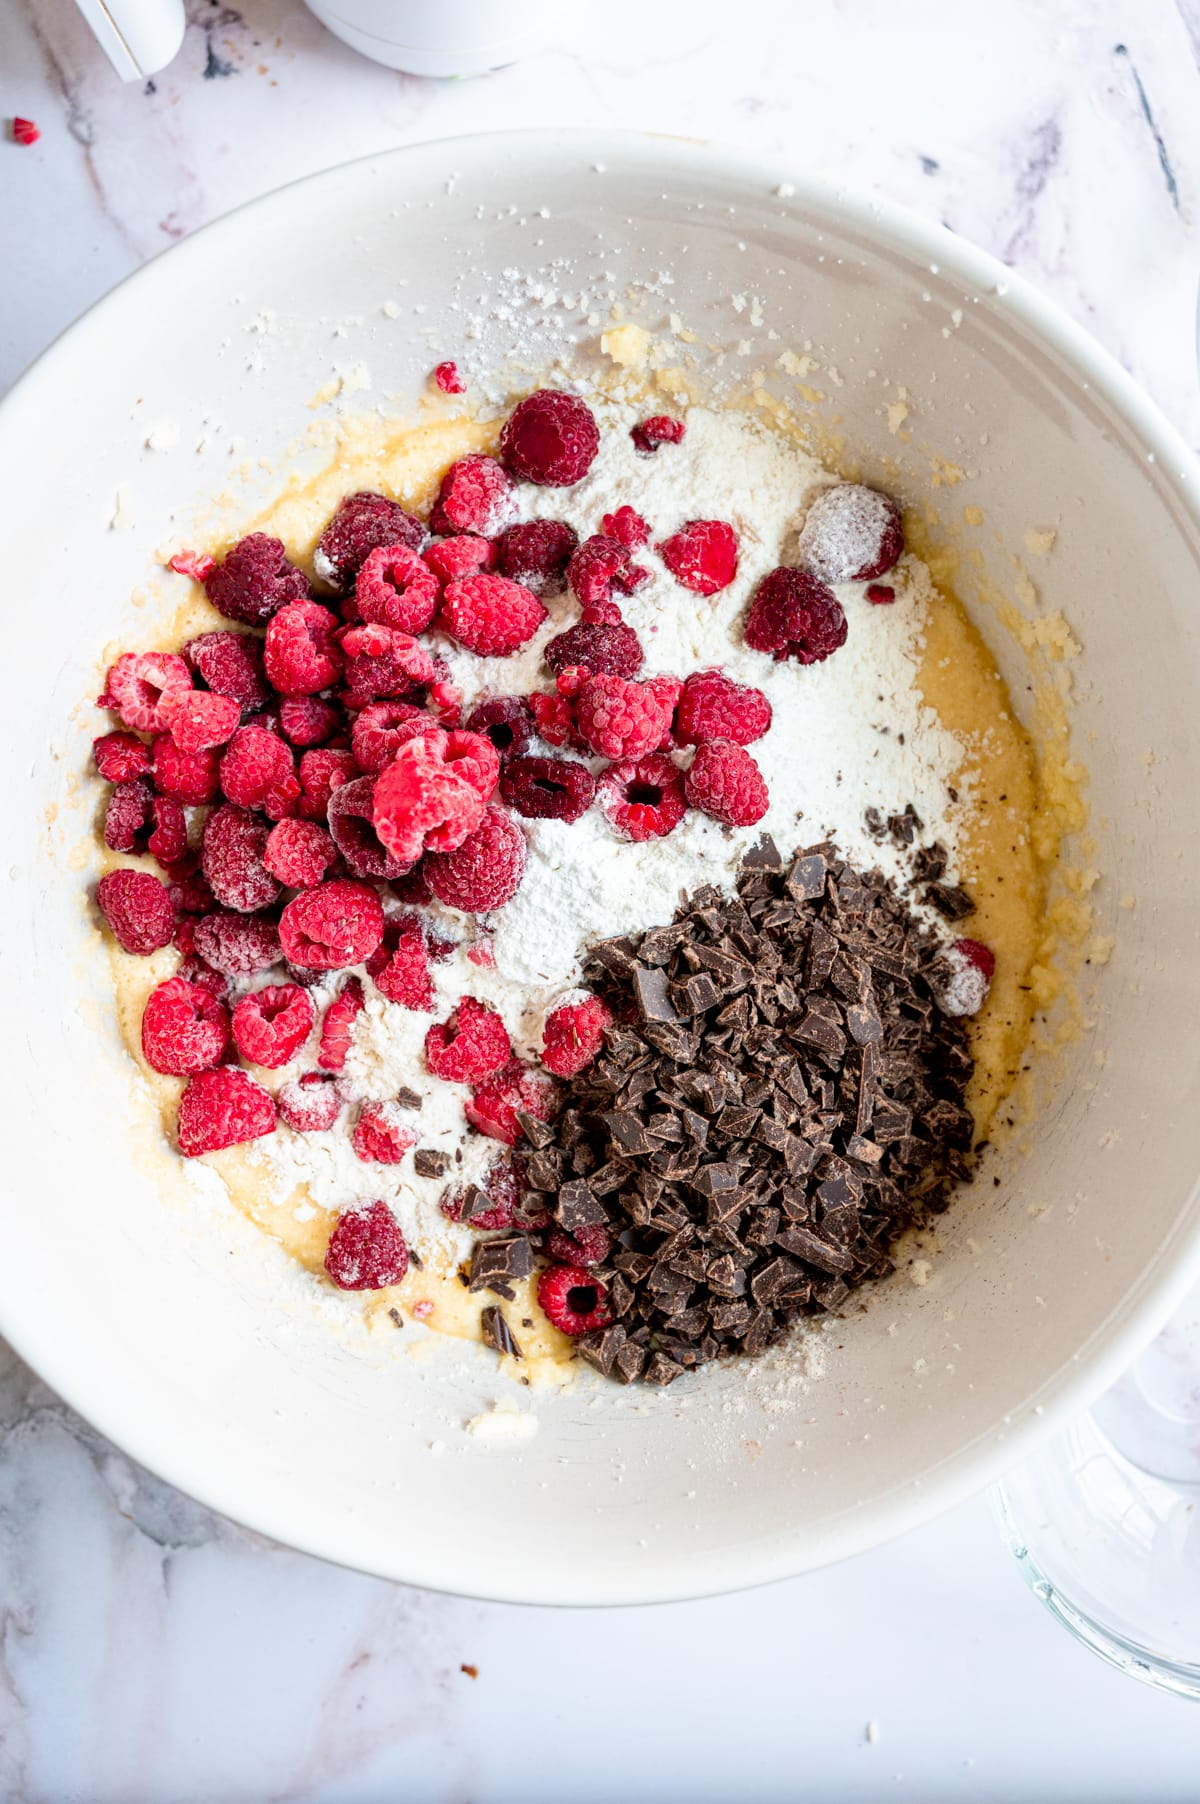 All the ingredients in the mixing bowl with the raspberries and chocolate on top.